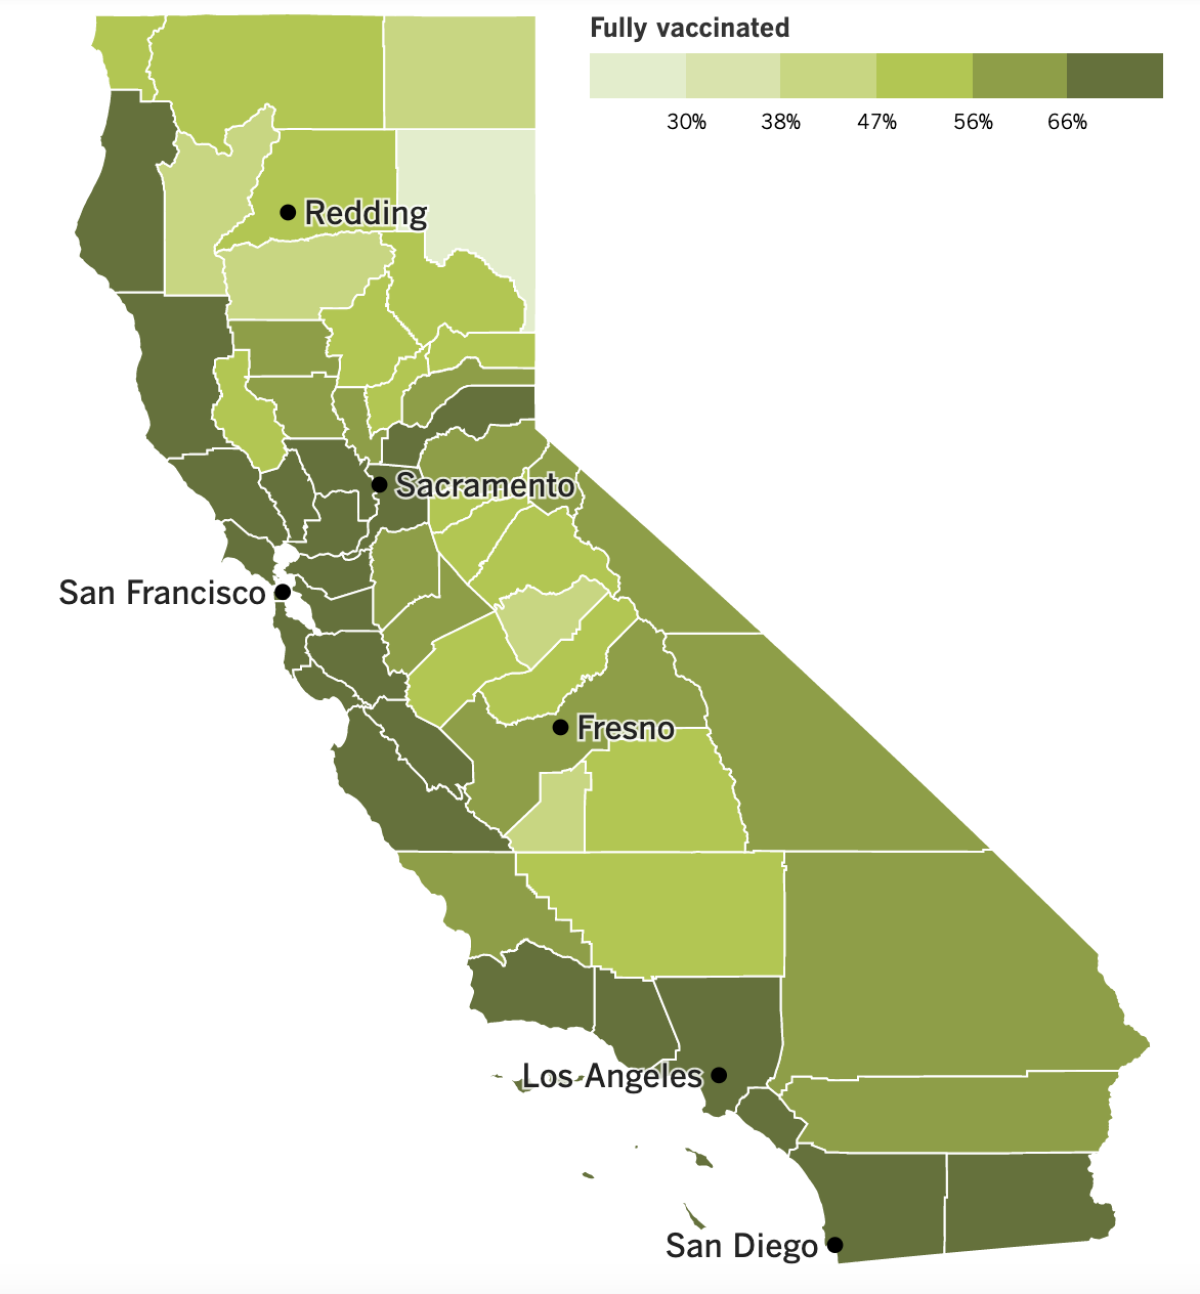 A map showing California's vaccination progress by county as of June 21, 2022.